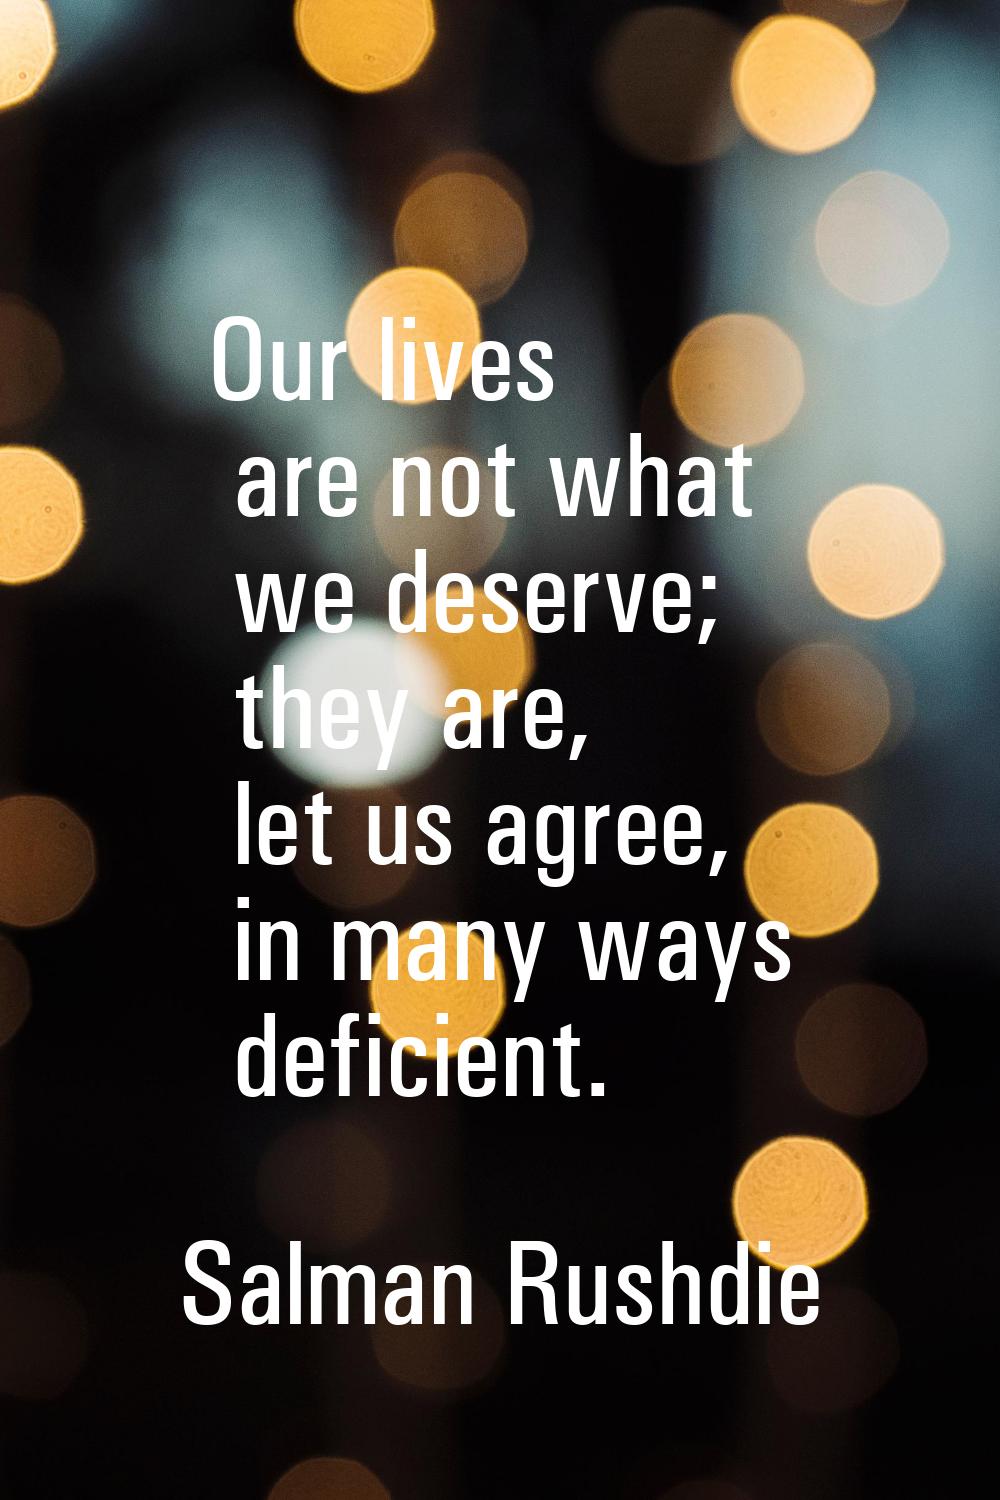 Our lives are not what we deserve; they are, let us agree, in many ways deficient.